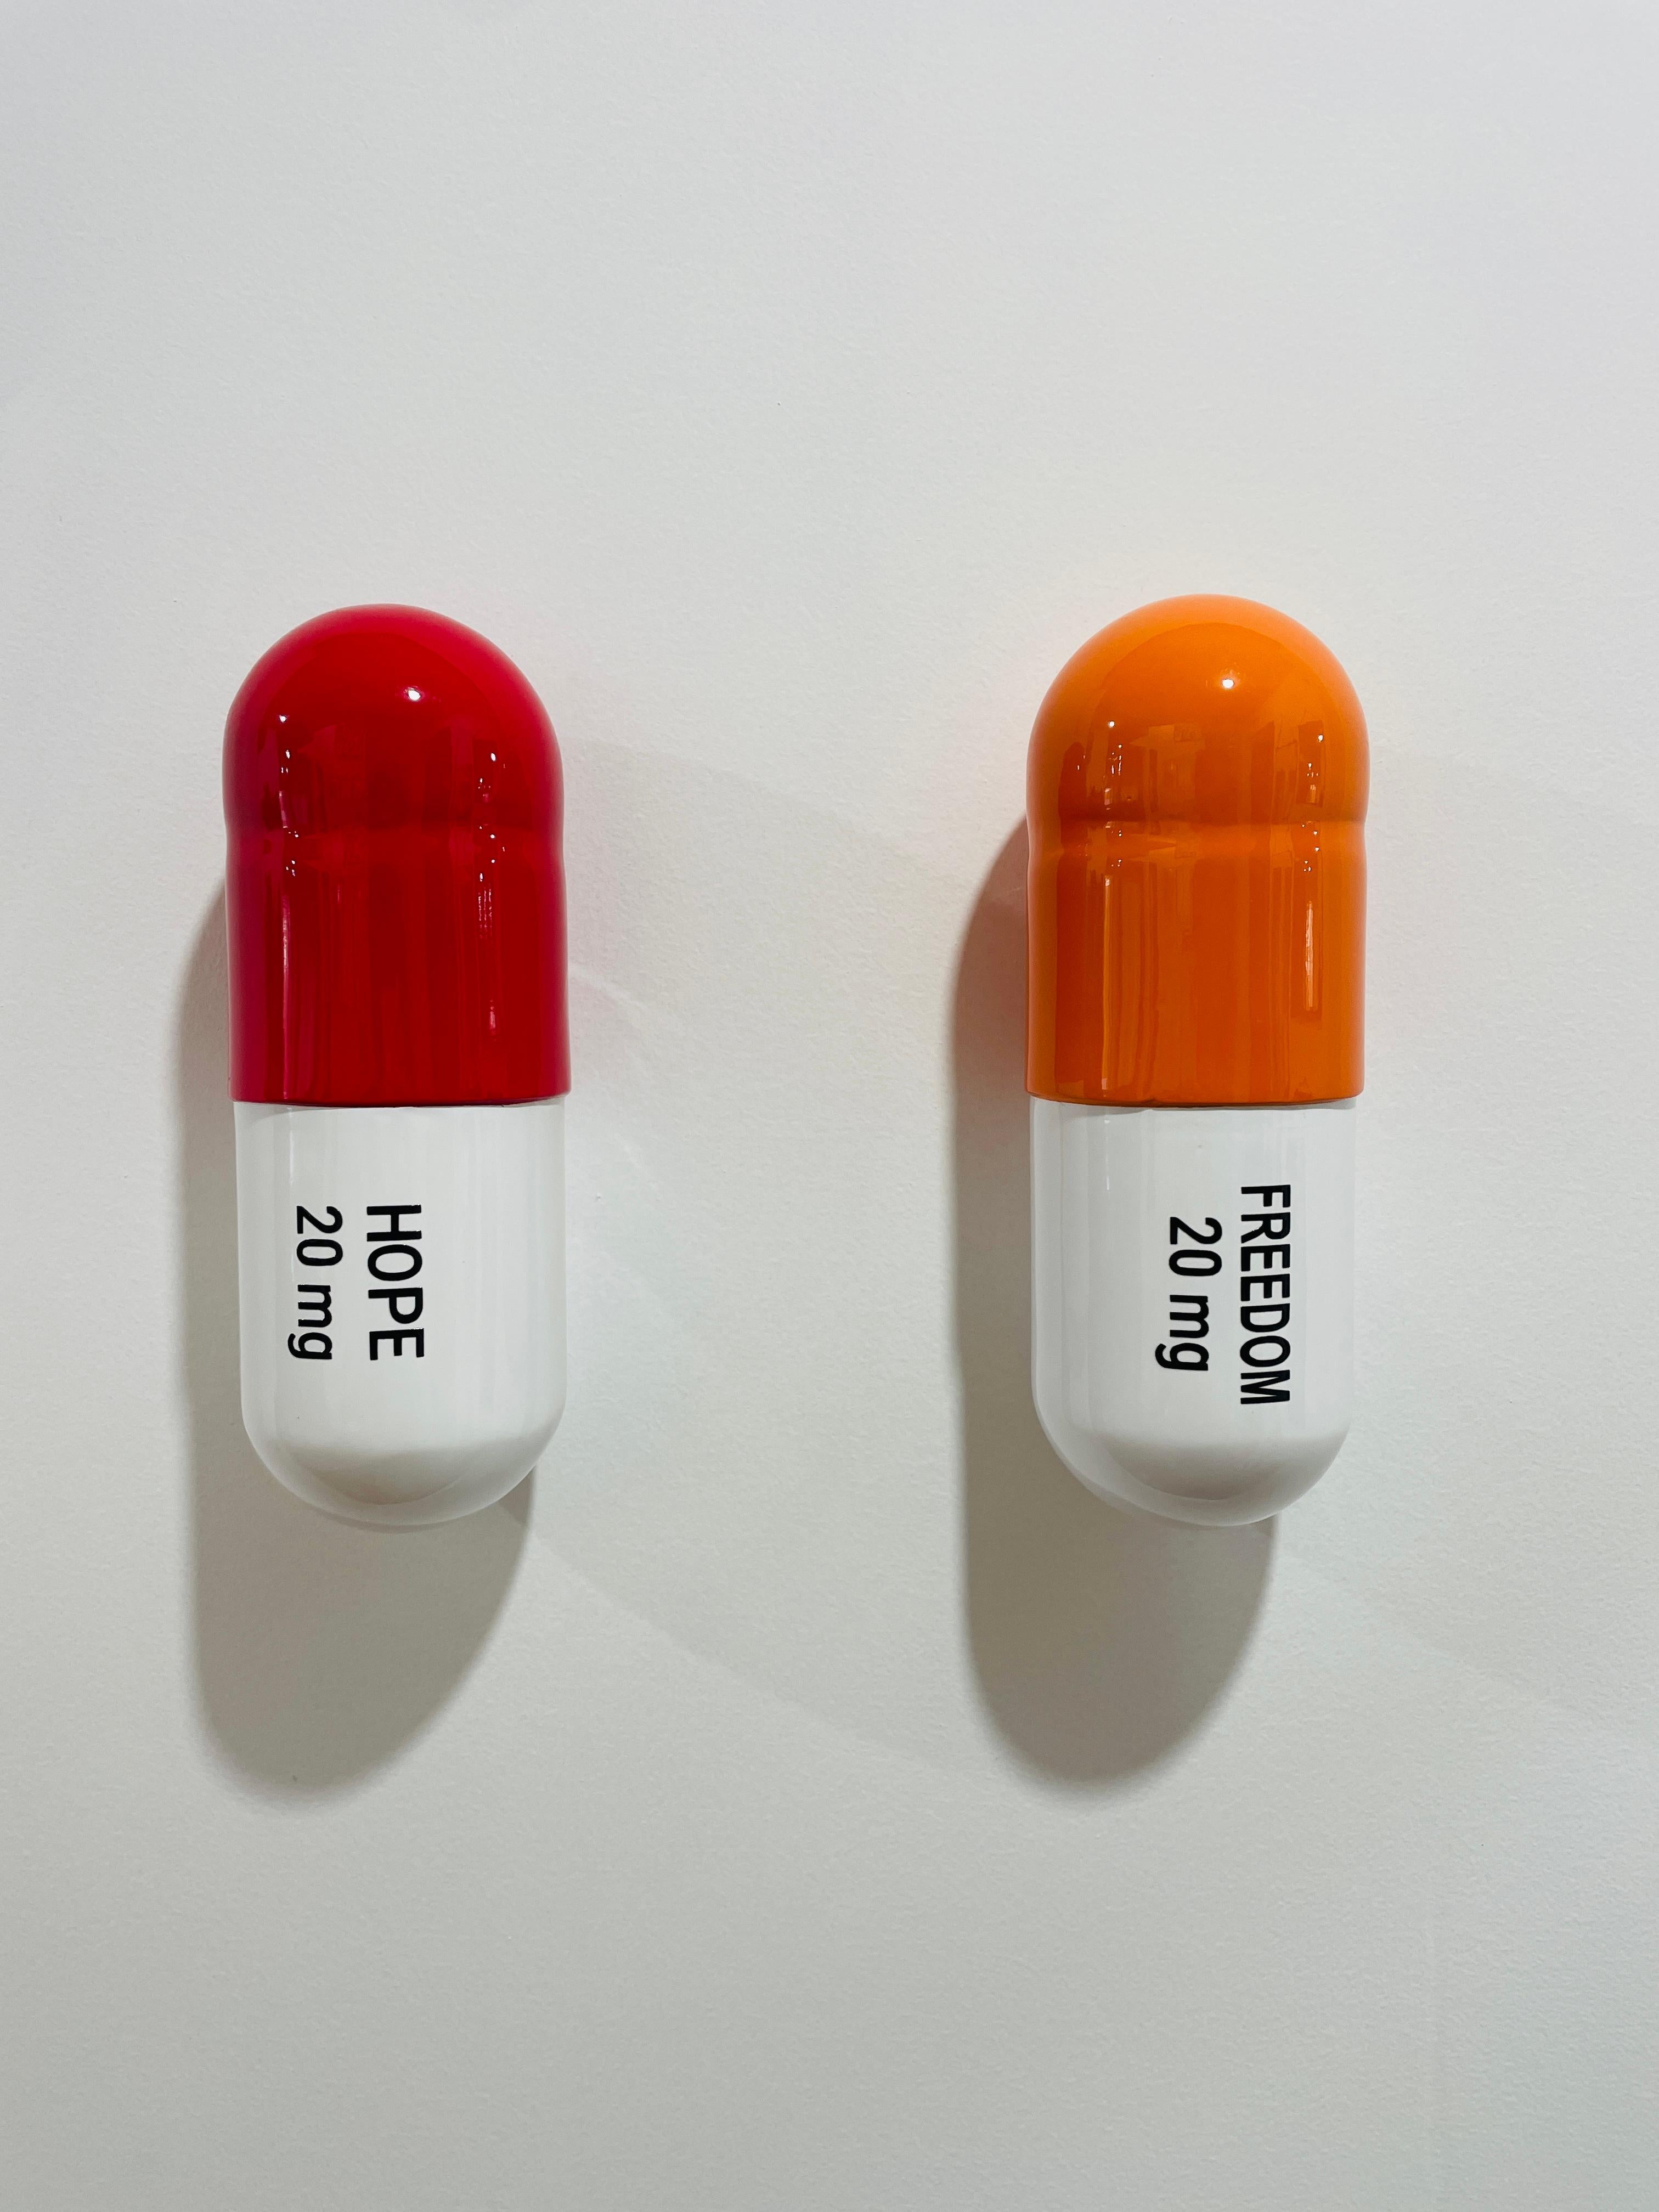 20 MG Hope Freedom pill Combo (red, orange, white) - figurative sculpture - Sculpture by Tal Nehoray